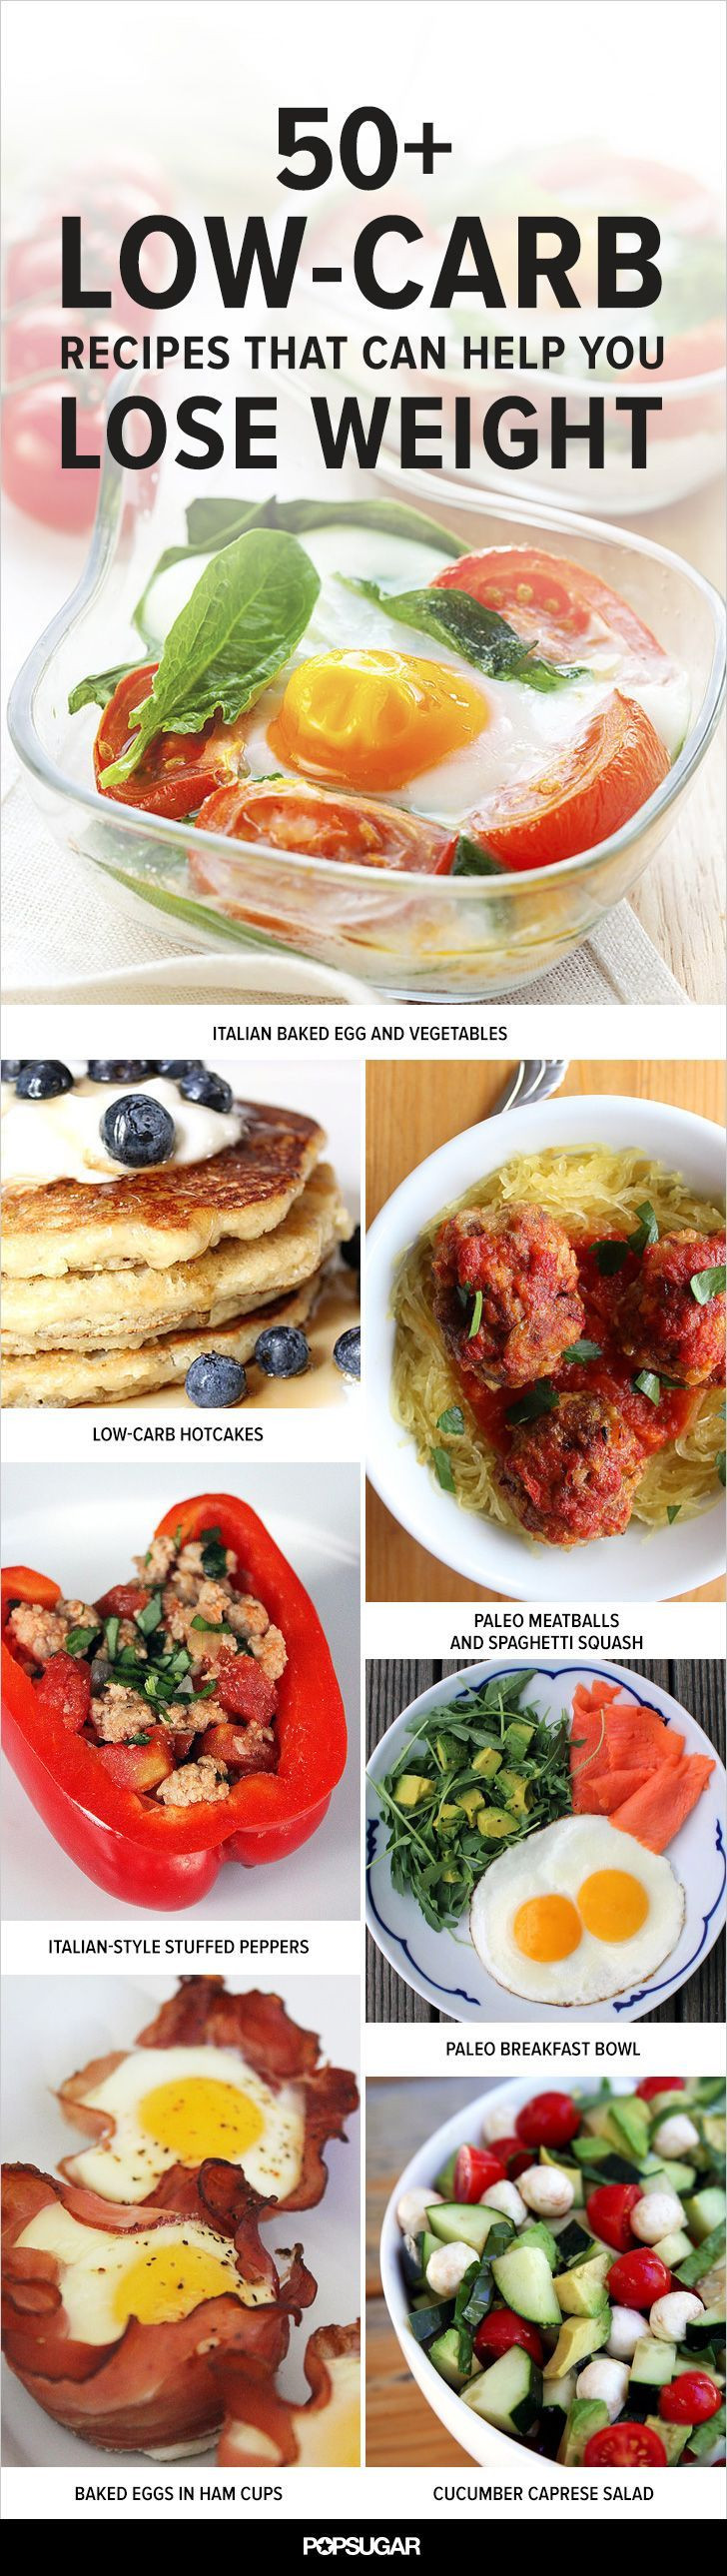 Low Carb Recipes For Weight Loss
 Best 25 Low carb food list ideas on Pinterest